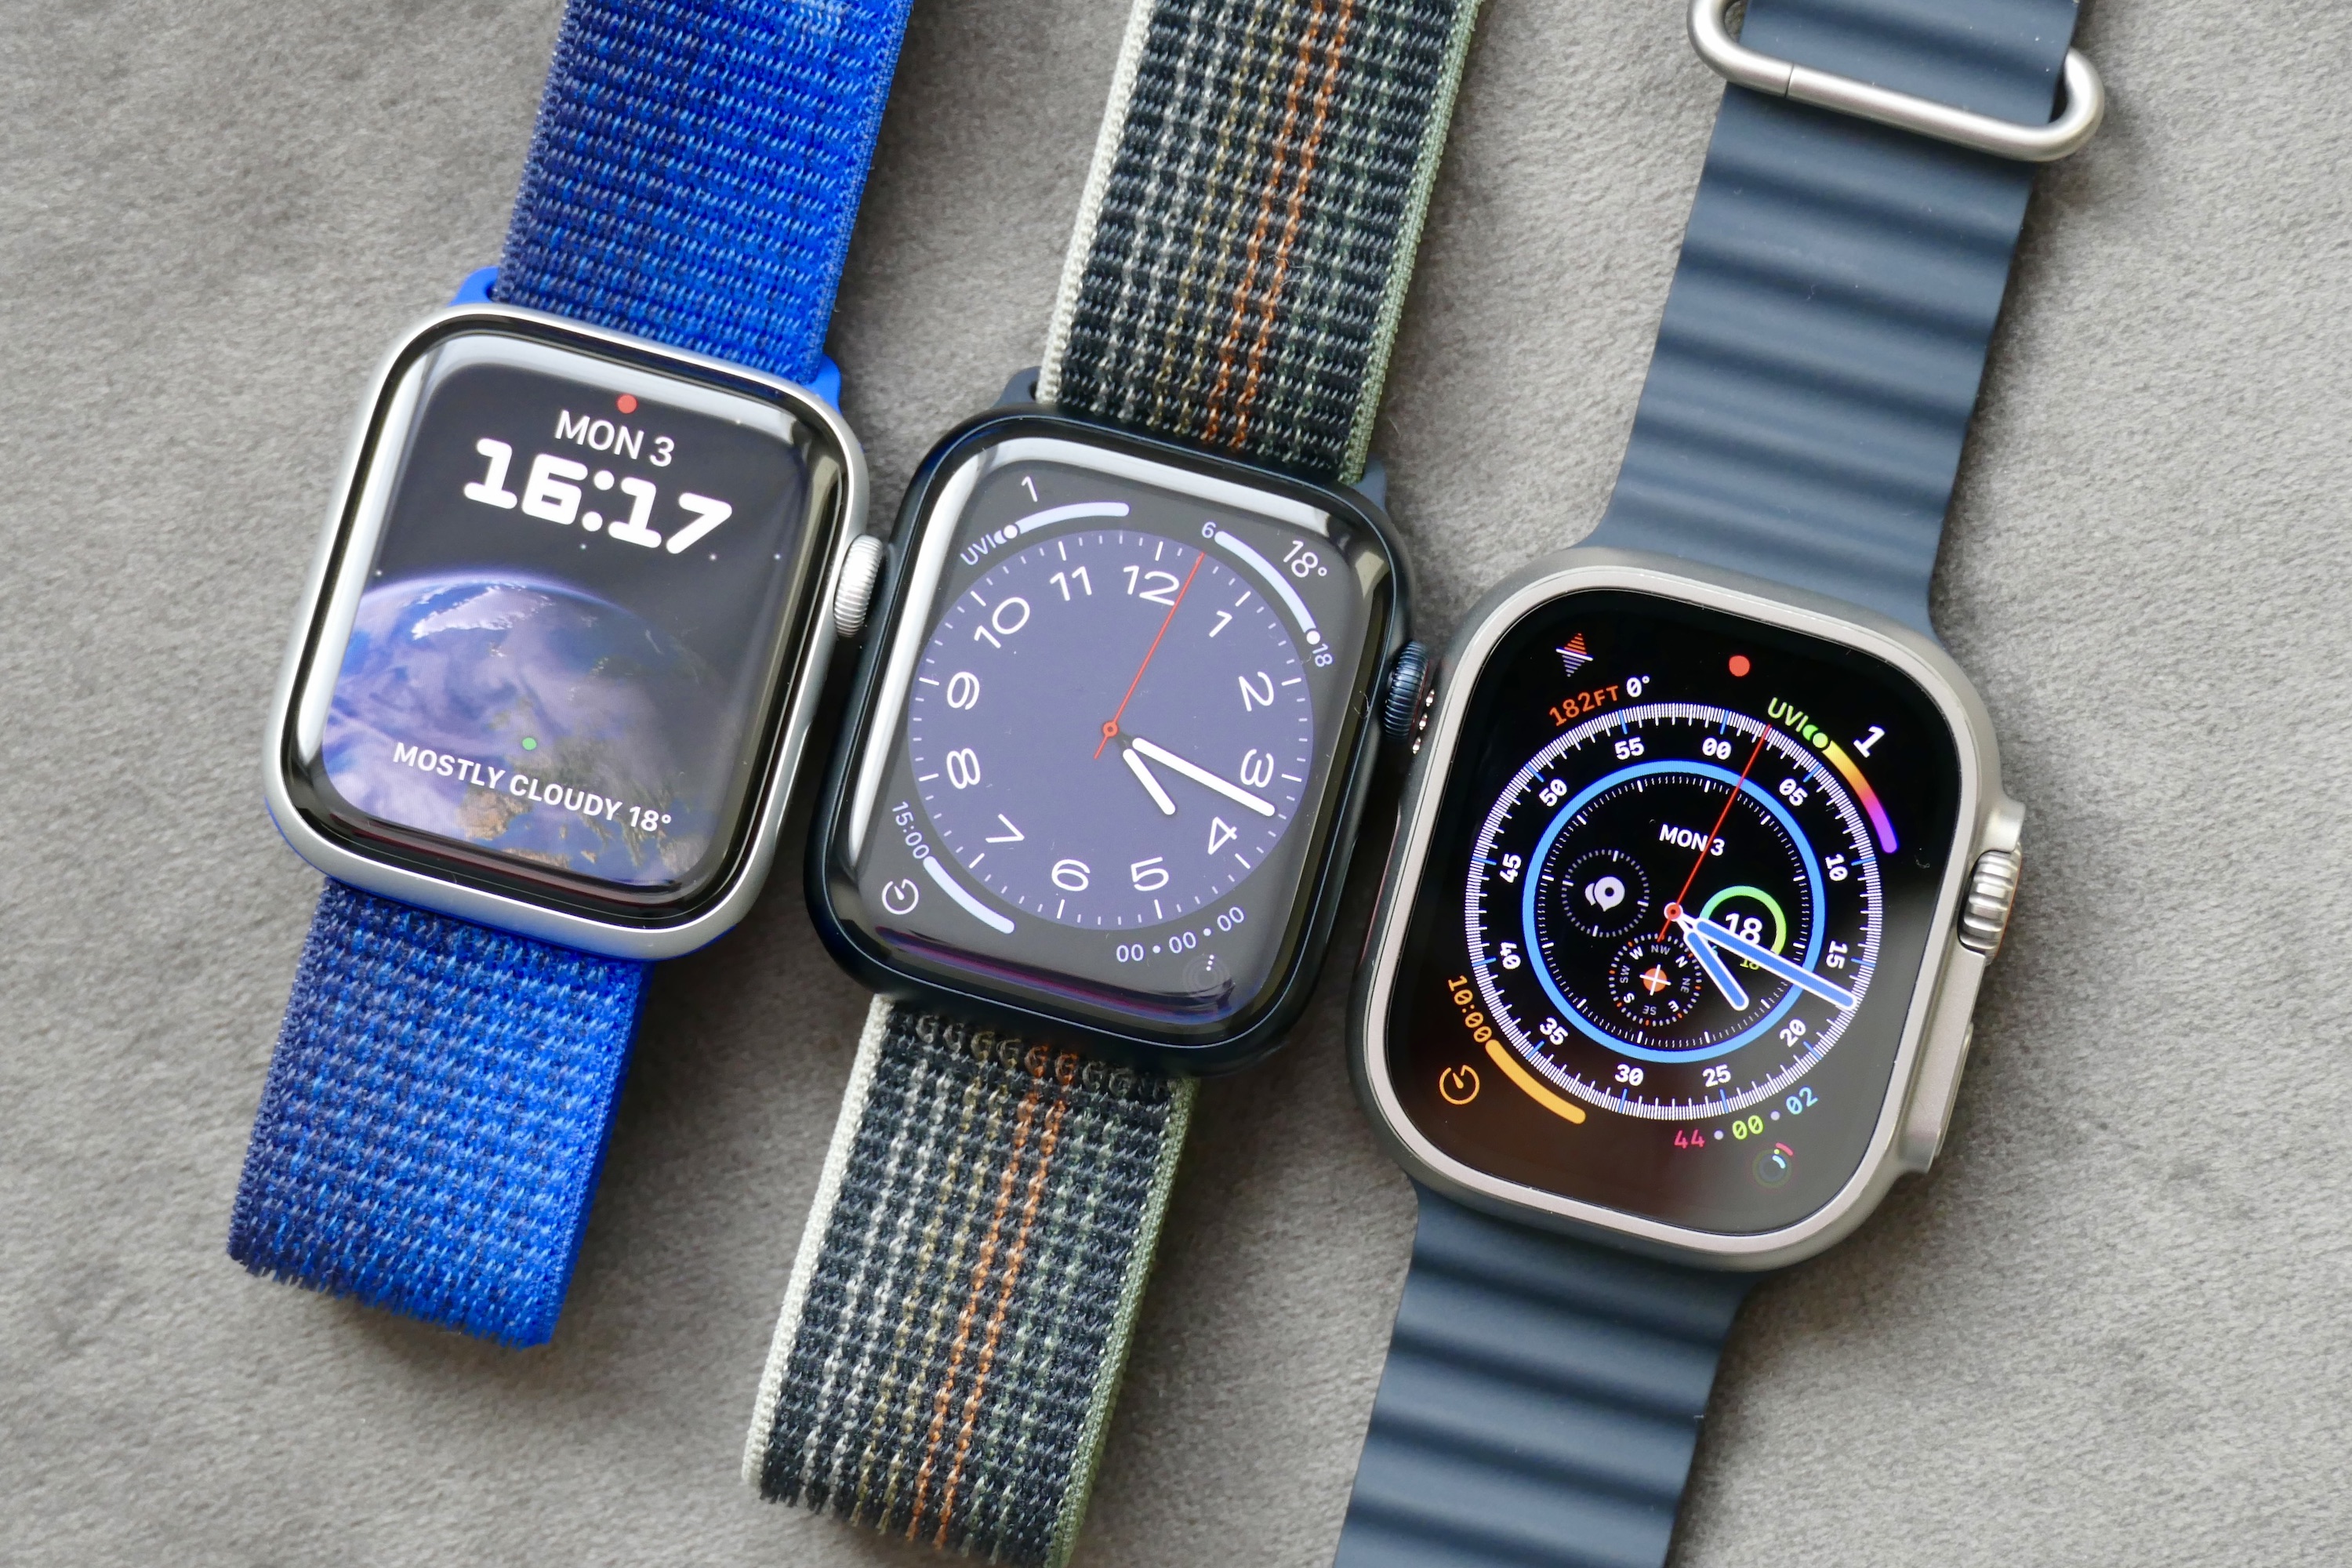 I finally got an Apple Watch Ultra. Here are 3 ways it surprised